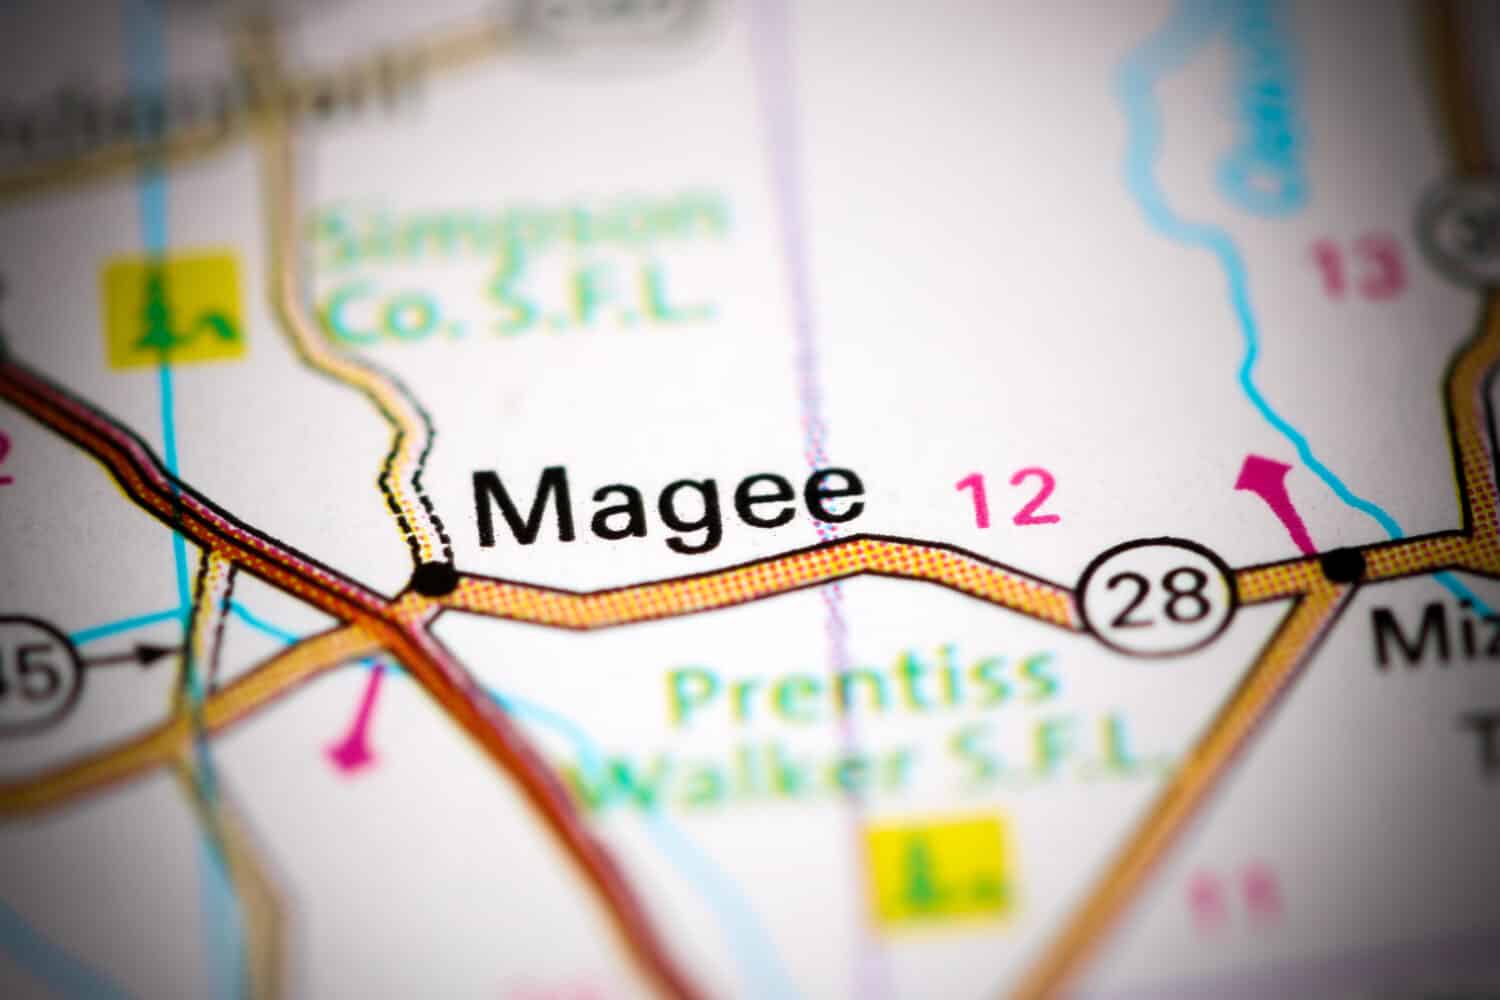 Magee. Mississippi. USA on a map